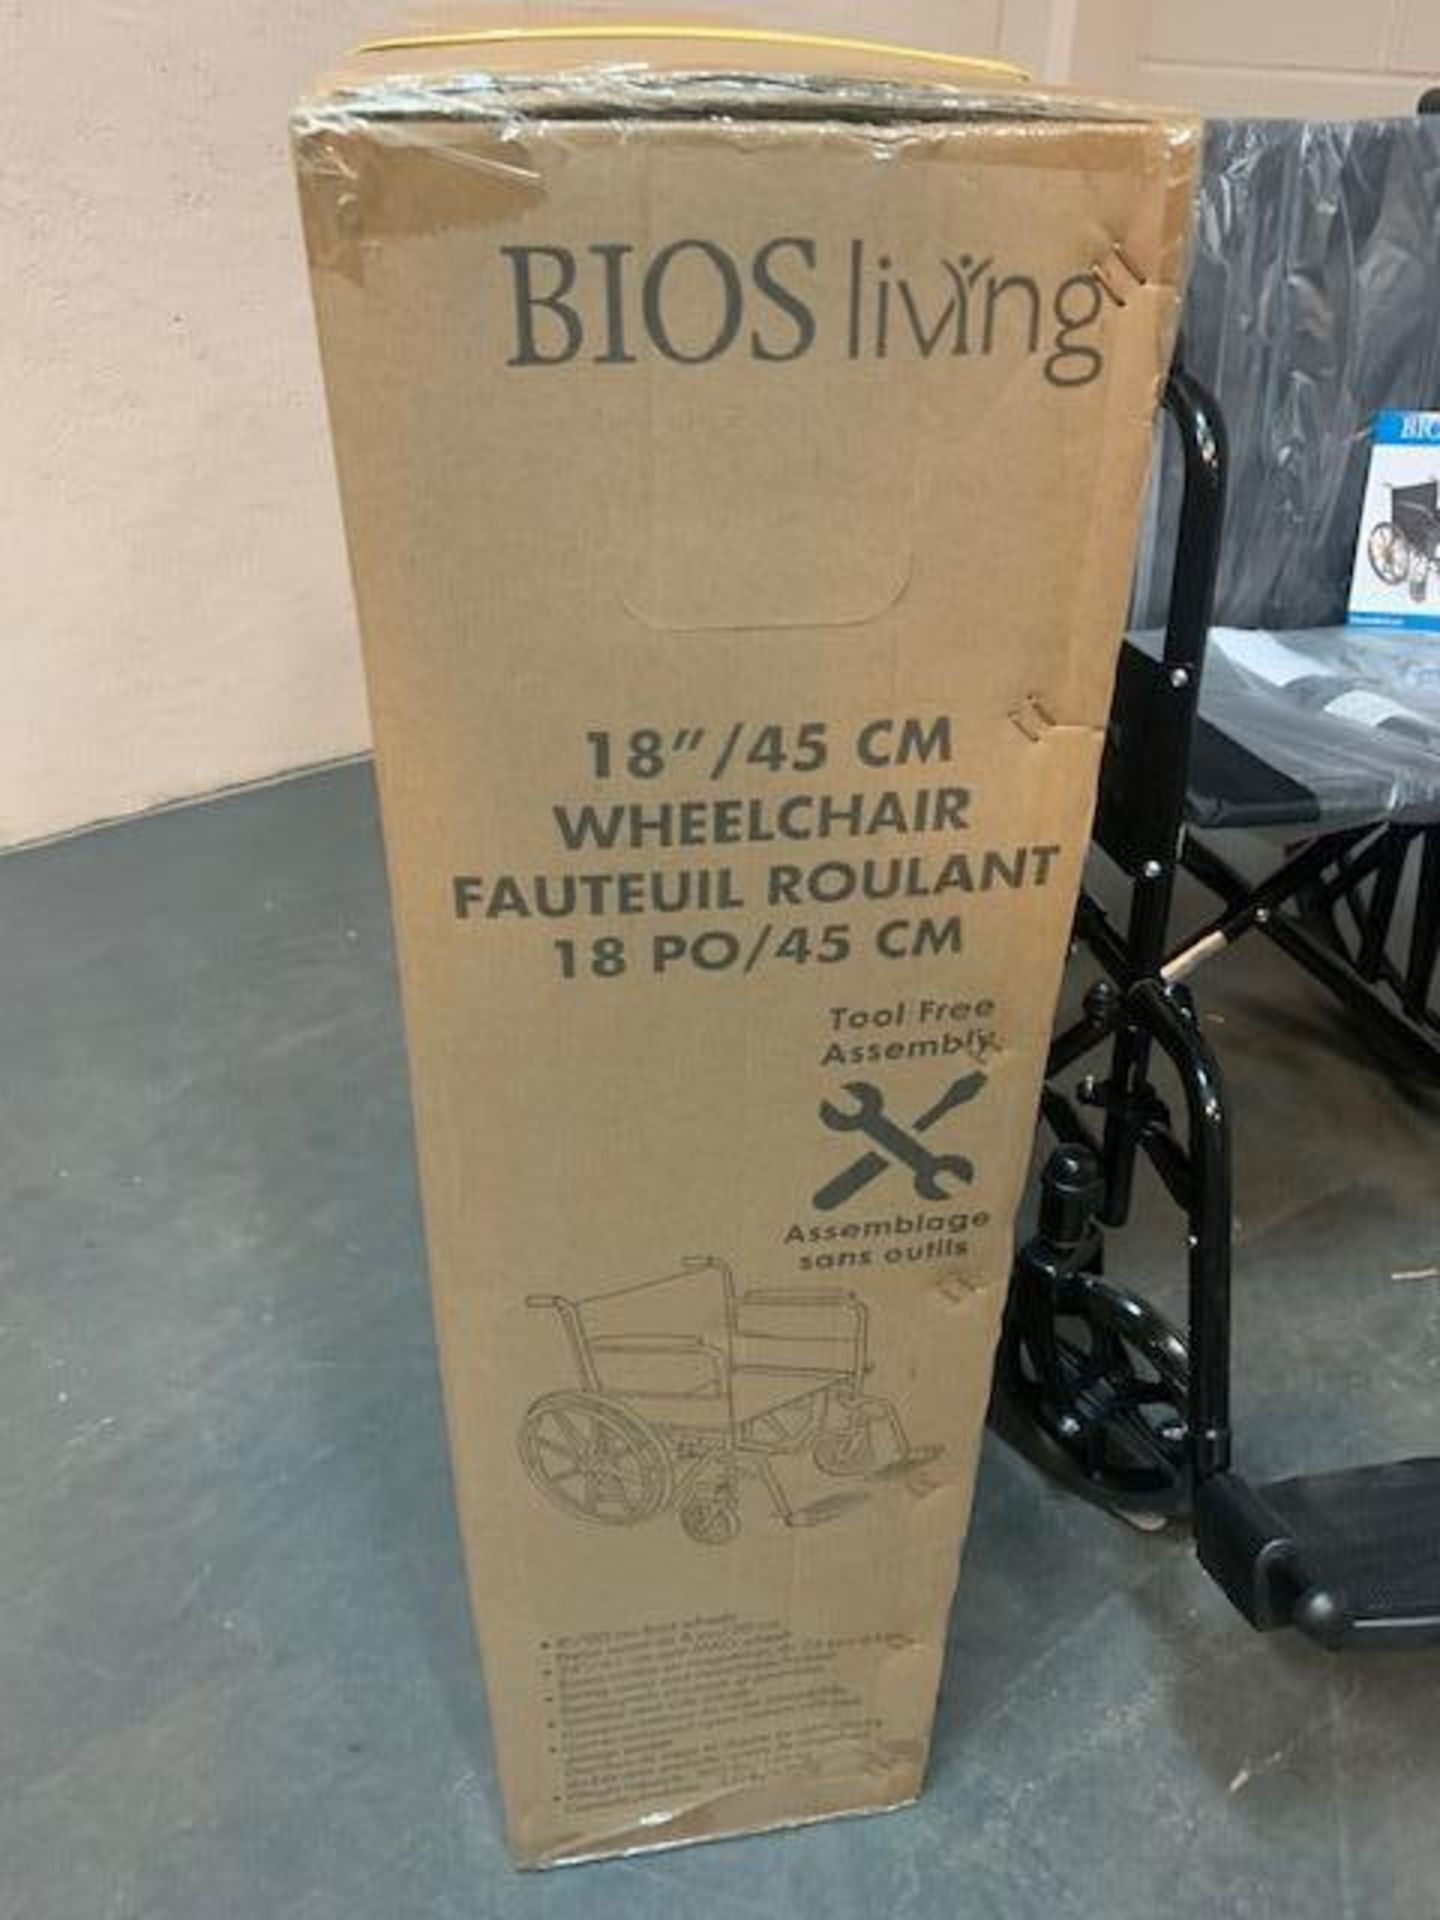 New In Box BIOS Living 18 inch / 45 cm Wheelchair Tool Free Assembly - Image 4 of 6